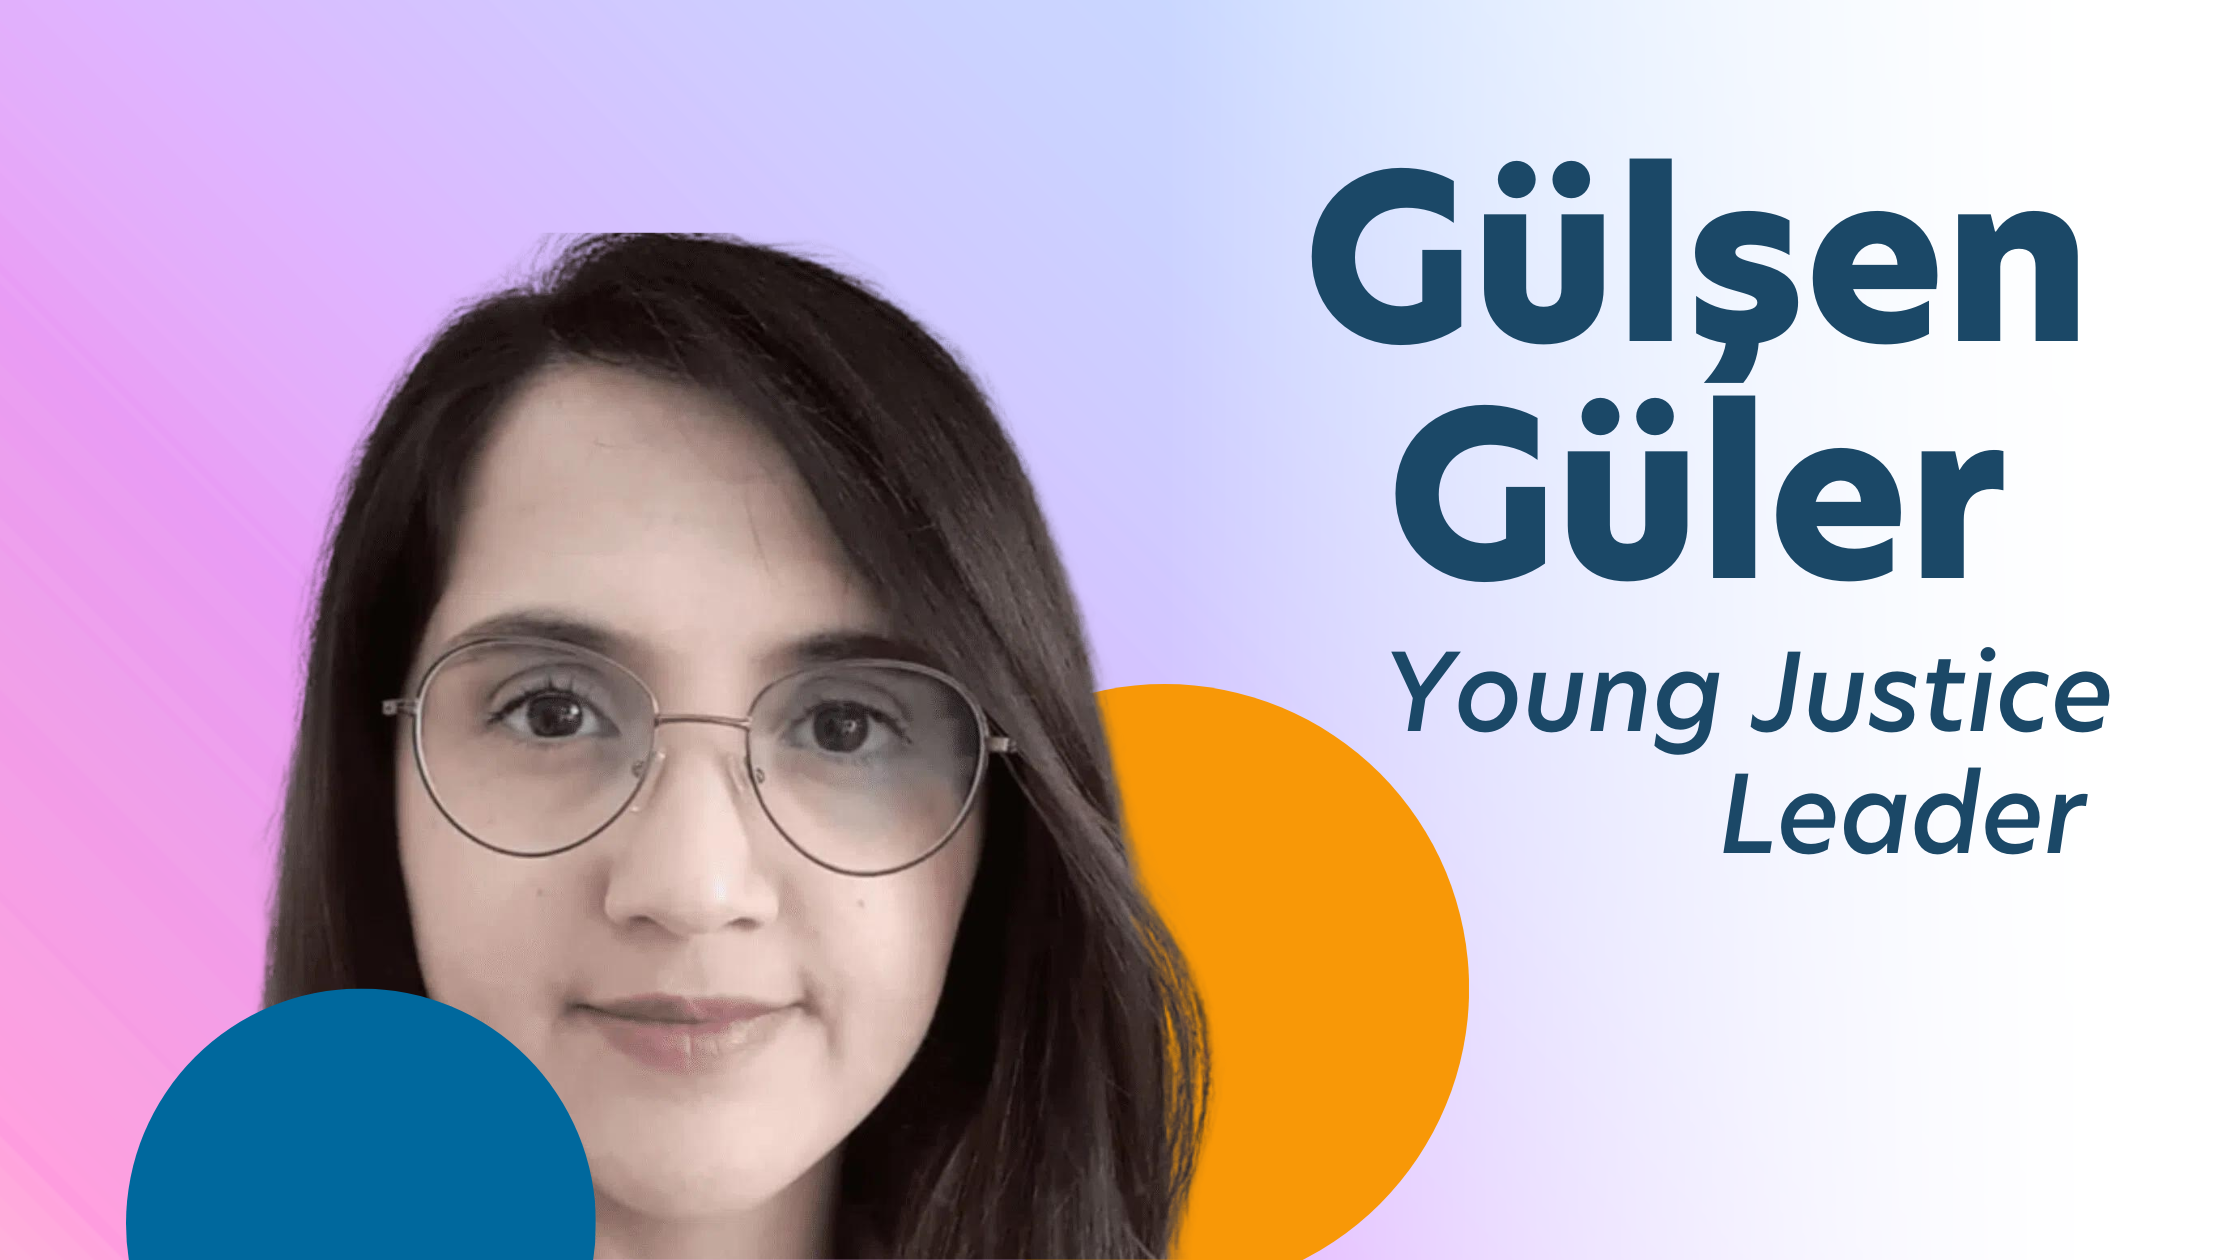 Gradient (pink-purple) background with a headshot of a person with glasses. Text reads: "Gülşen Güler; Young Justice Leader"